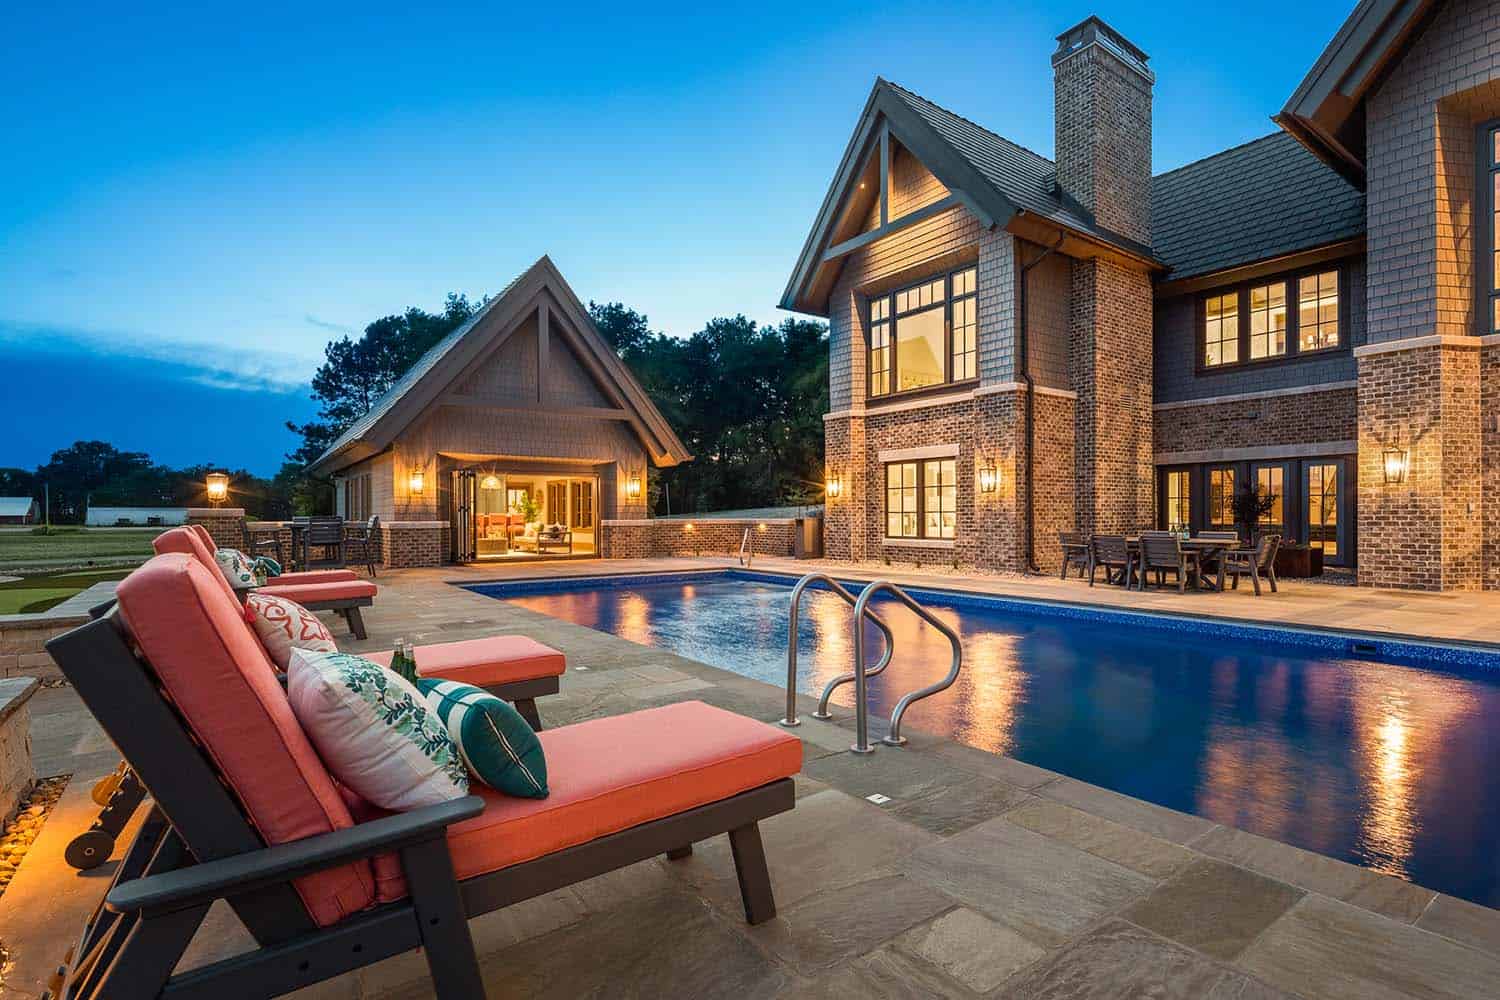 shingle-style-lodge-exterior-with-a-pool